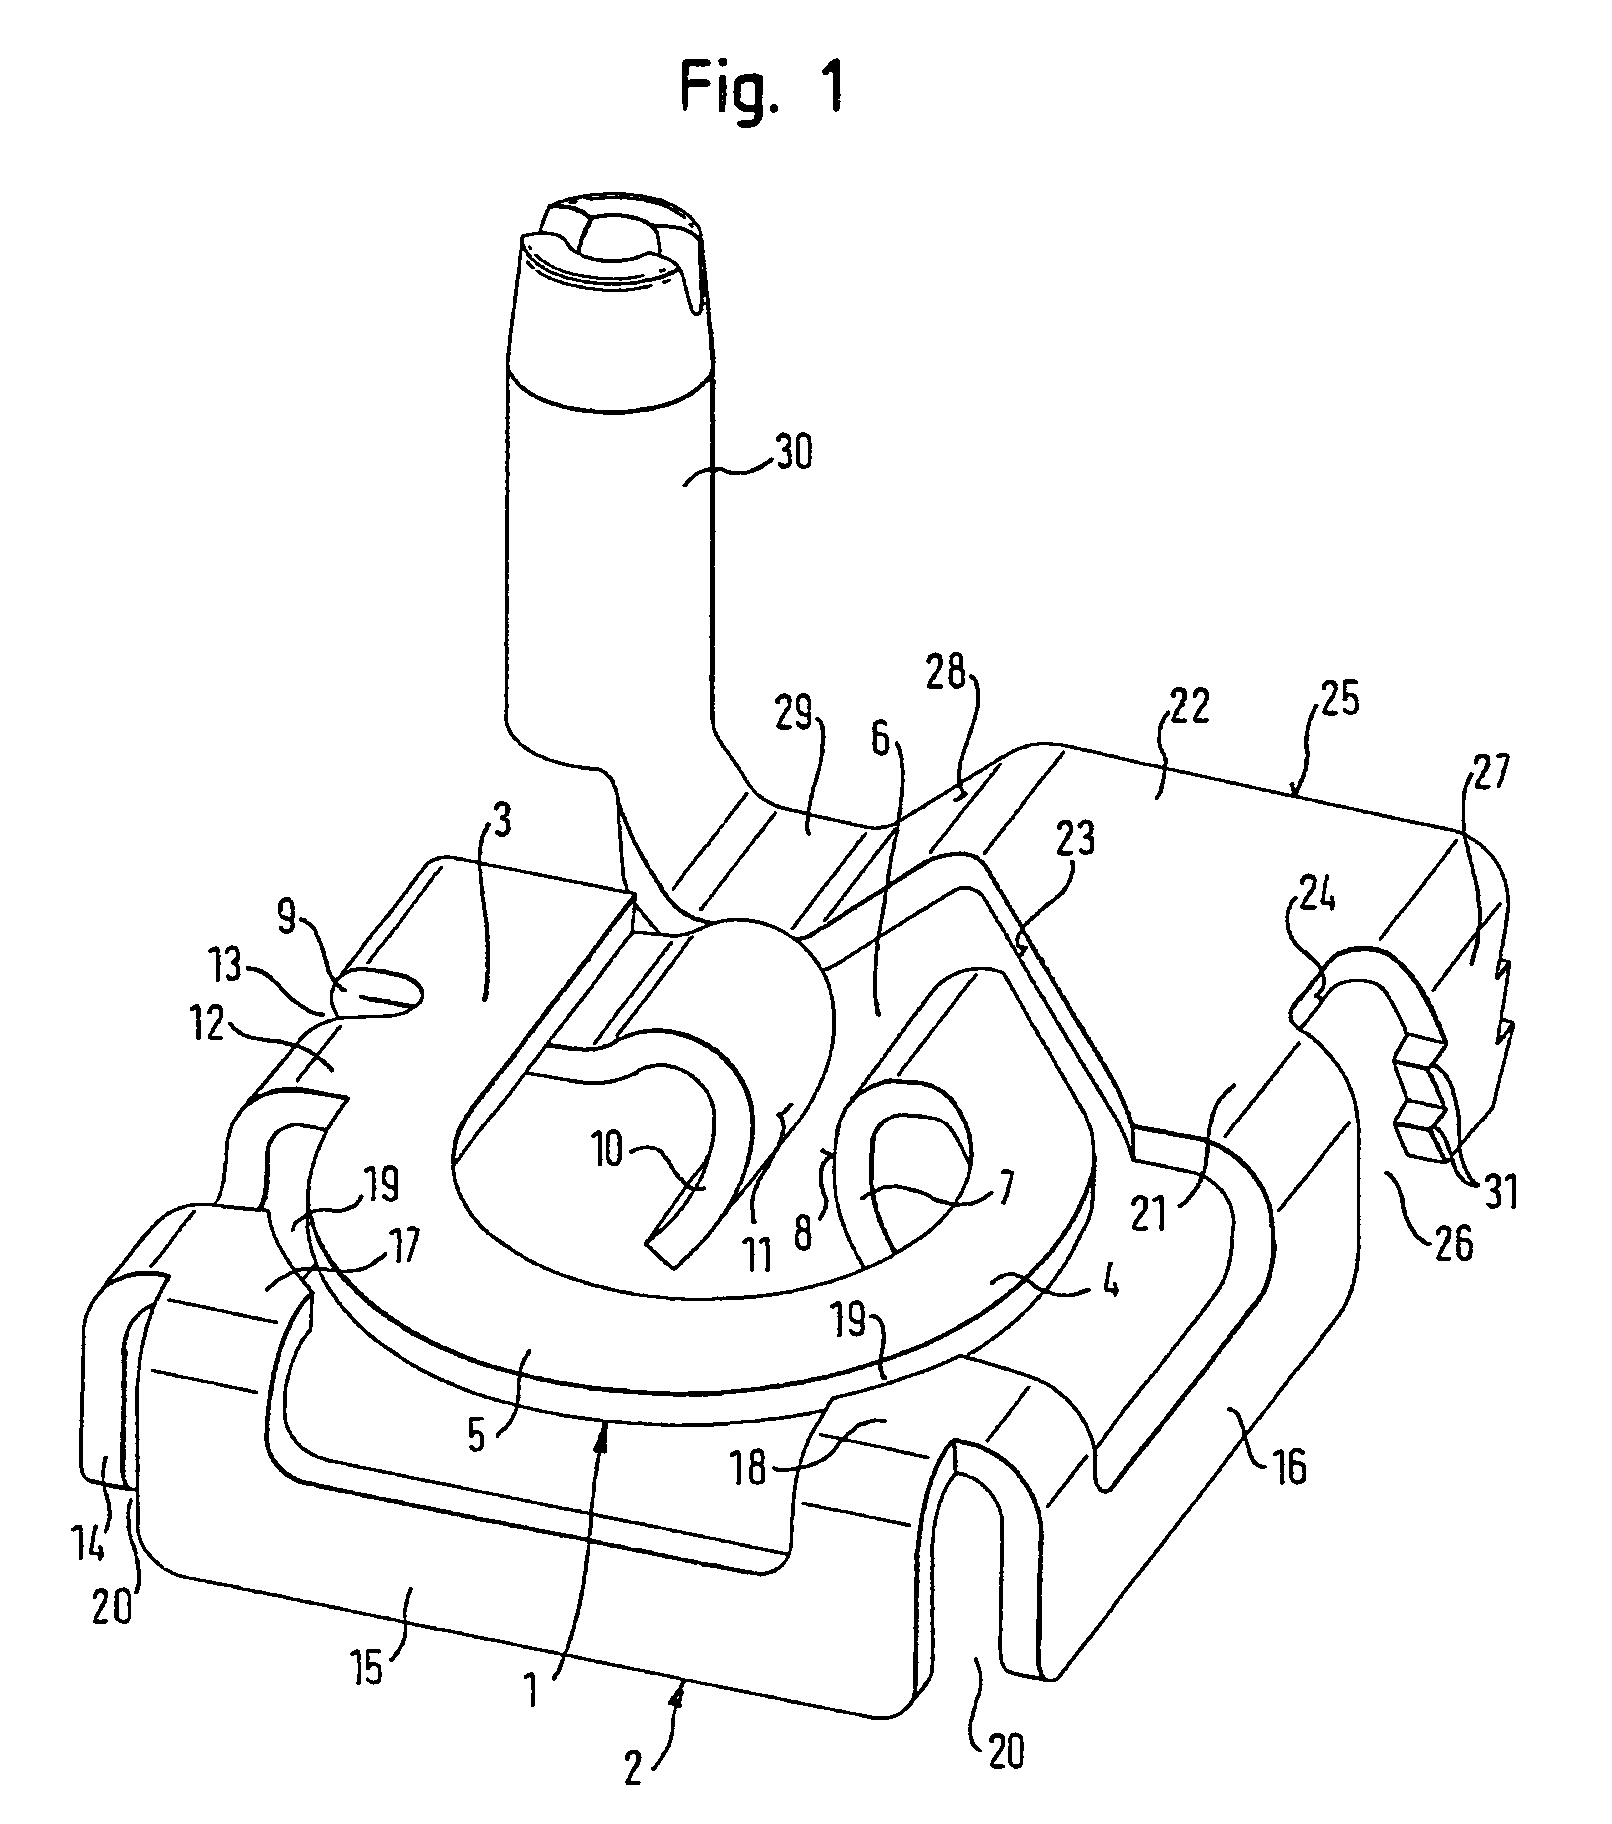 Electrical contact element as well as contacting device having a contact element